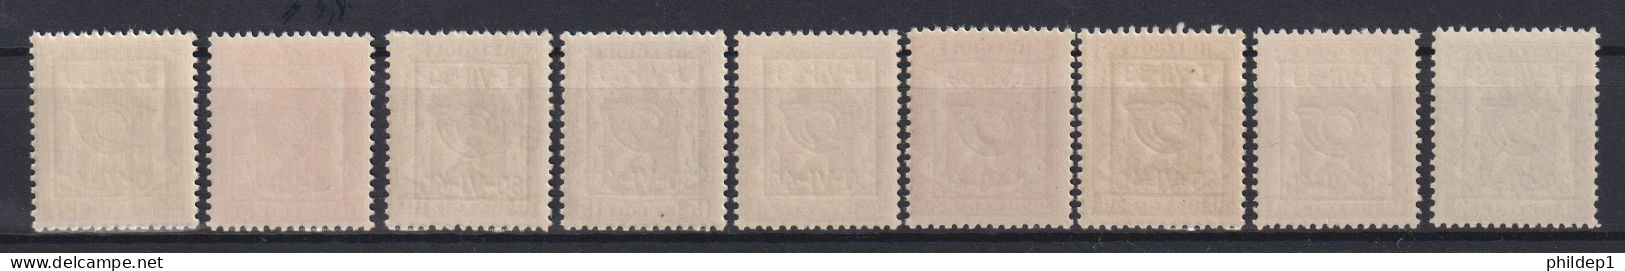 Belgique: COB N° PRE428/36 **, MNH, Neuf(s). TTB !!! Voir Le(s) Scan(s) !!! - Typo Precancels 1936-51 (Small Seal Of The State)